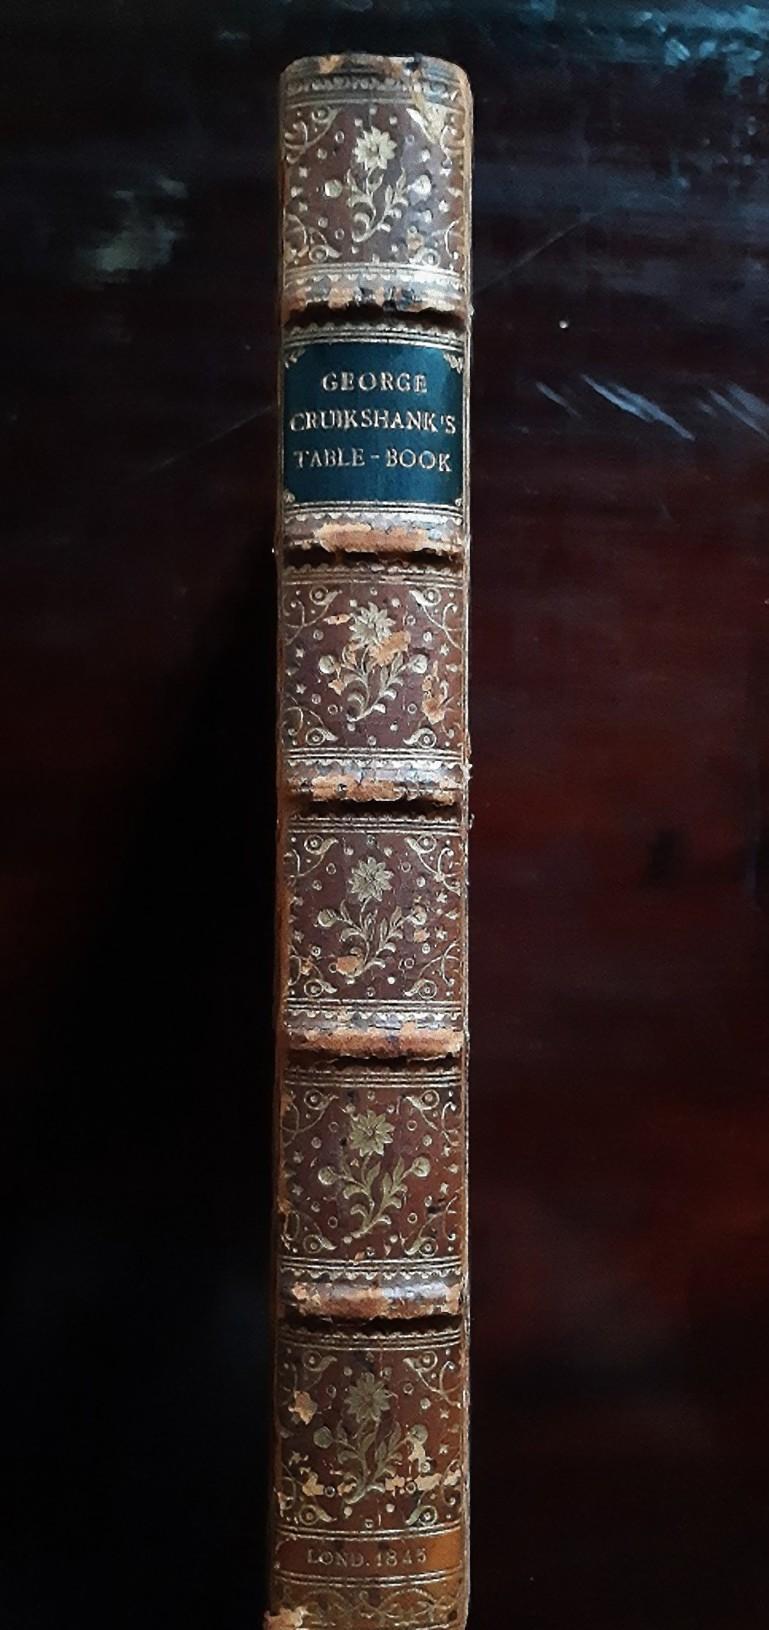 George Cruikshank’s Table Book - Rare Book Illustrated by G. Cruikshank - 1845 For Sale 2